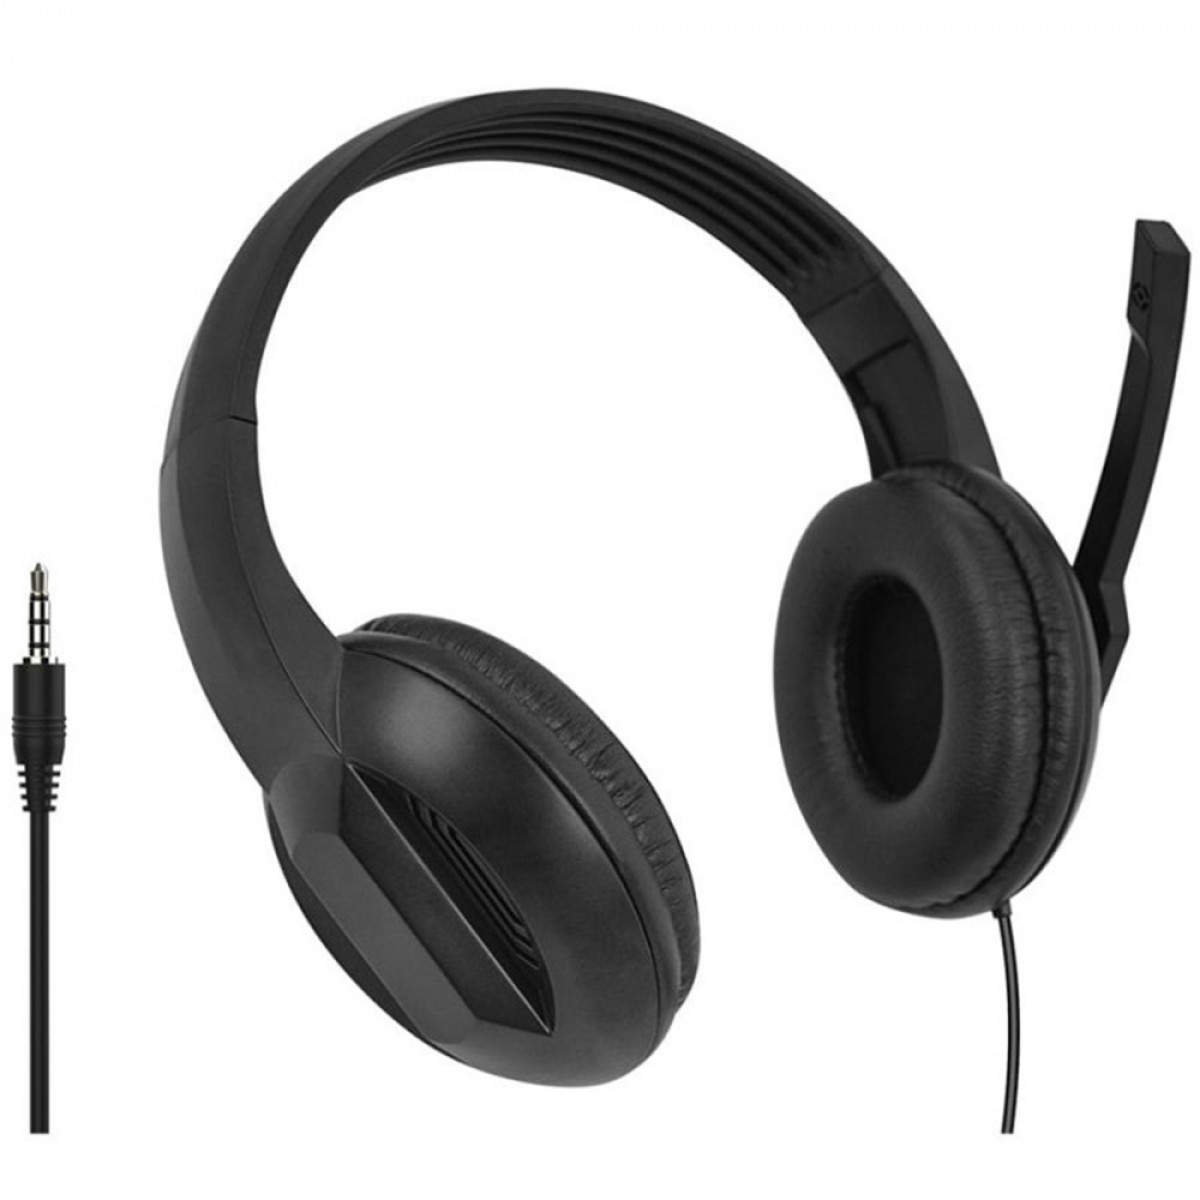 Headset Multilaser Office, P3, Stereo, Drivers 40mm, Black, PH373